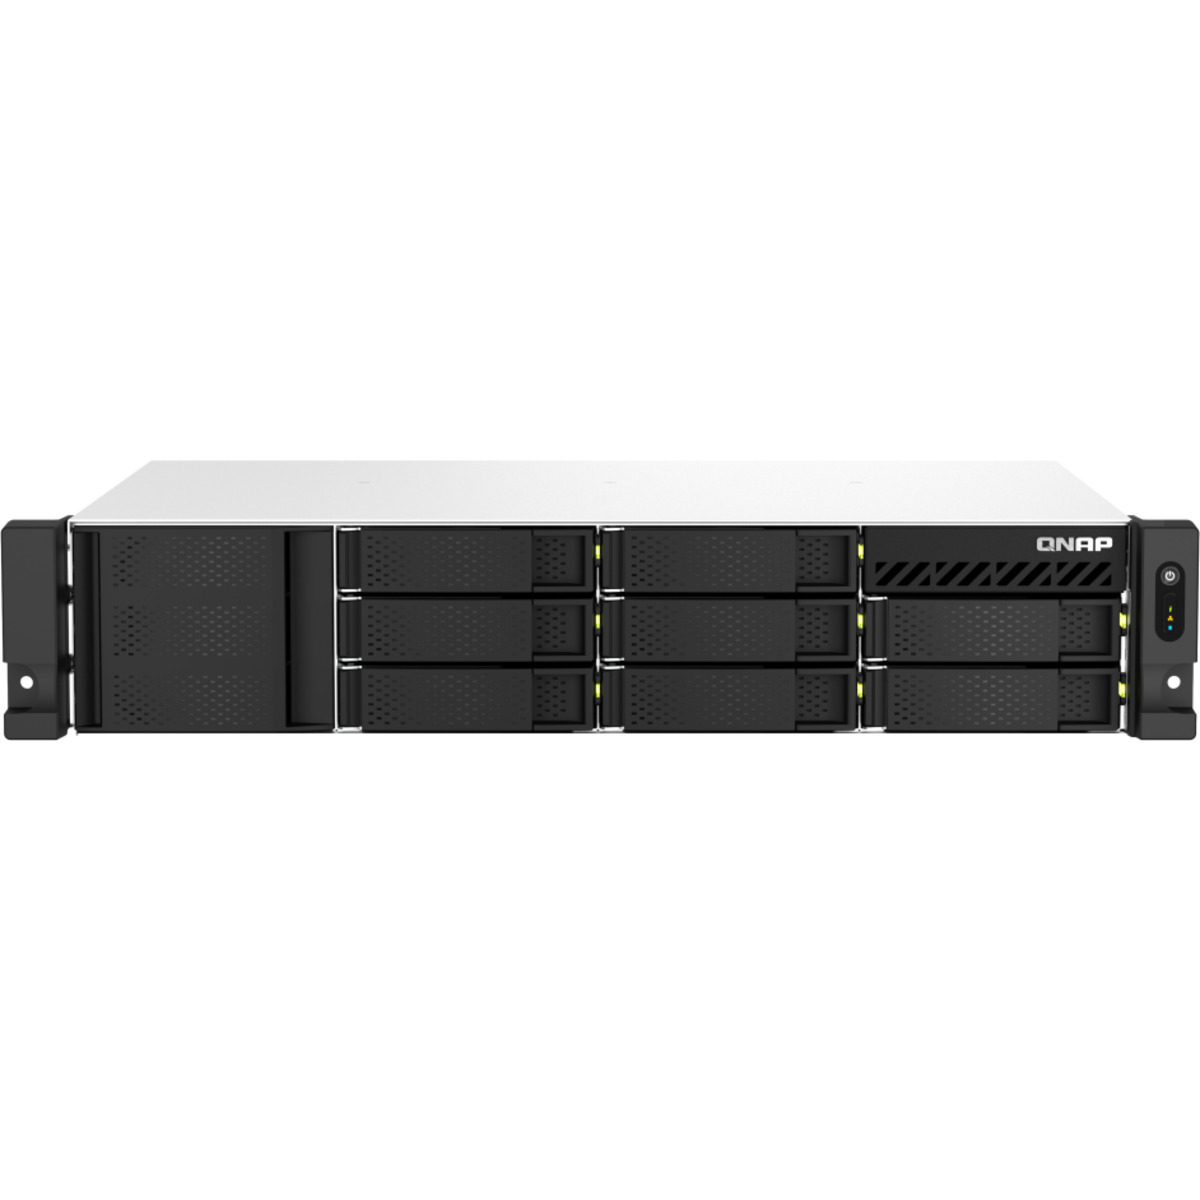 buy QNAP TS-873AeU-RP RackMount NAS - Network Attached Storage Device Burn-In Tested Configurations - FREE RAM UPGRADE - nas headquarters buy network attached storage server device das new raid-5 free shipping usa TS-873AeU-RP